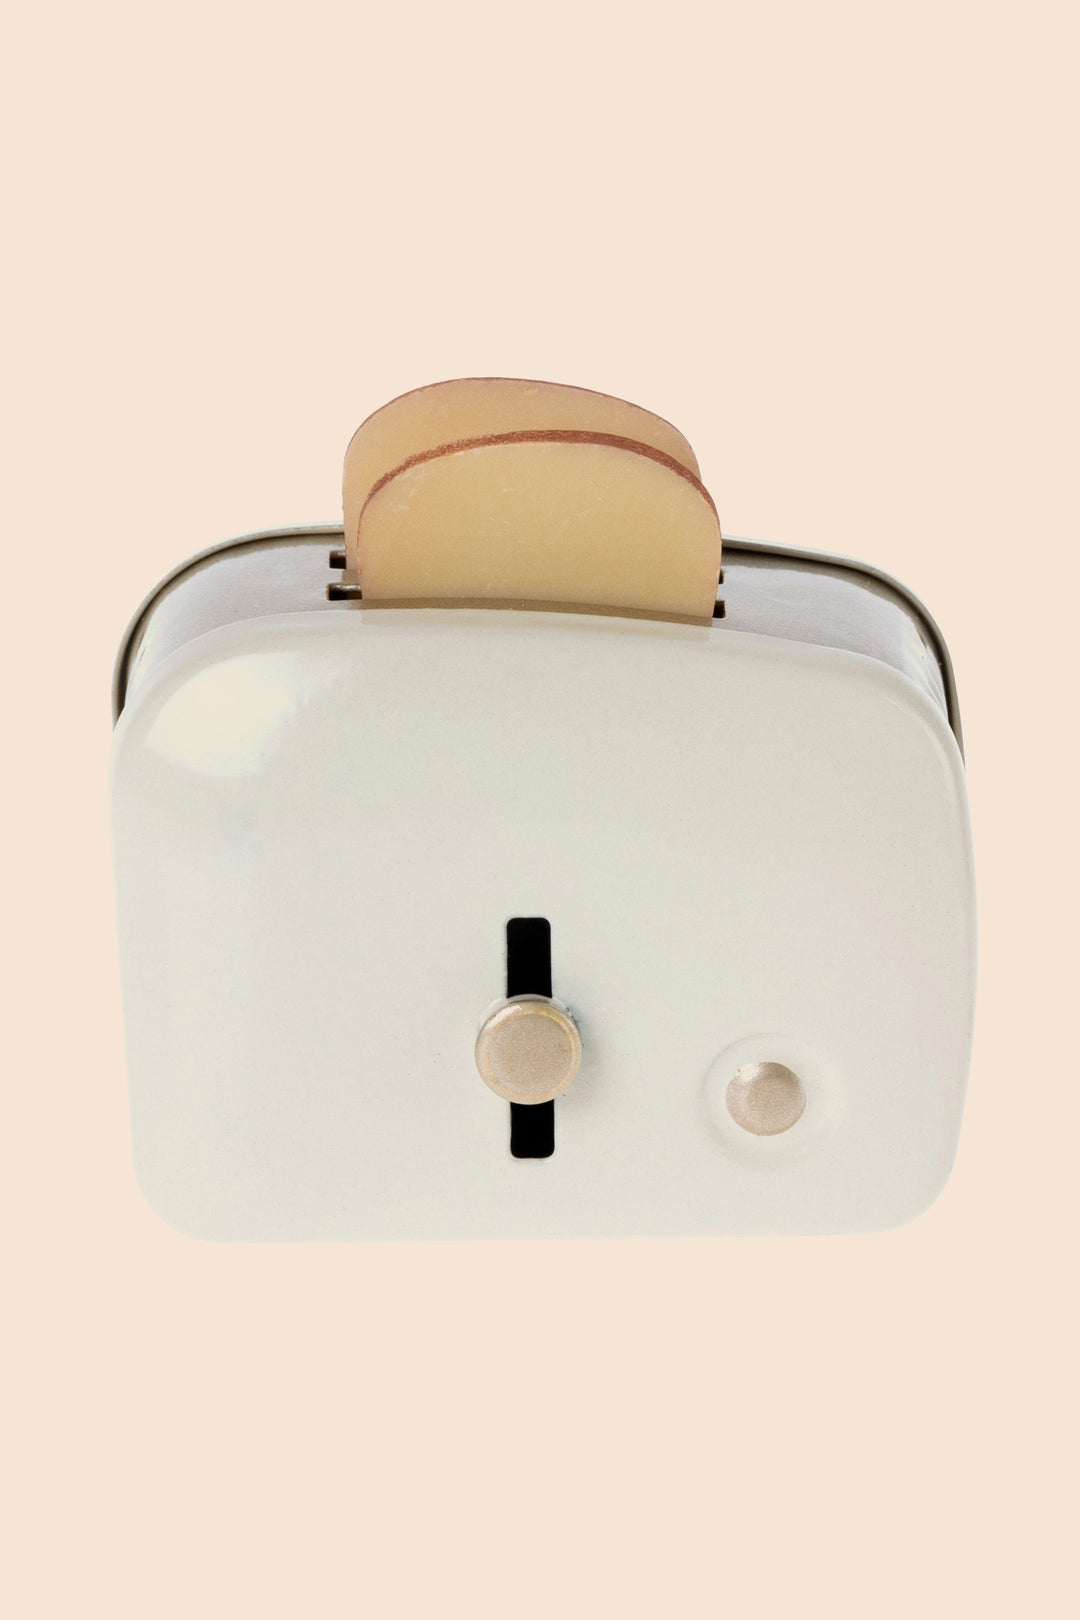 Maileg Miniature Toaster with bread-Off White